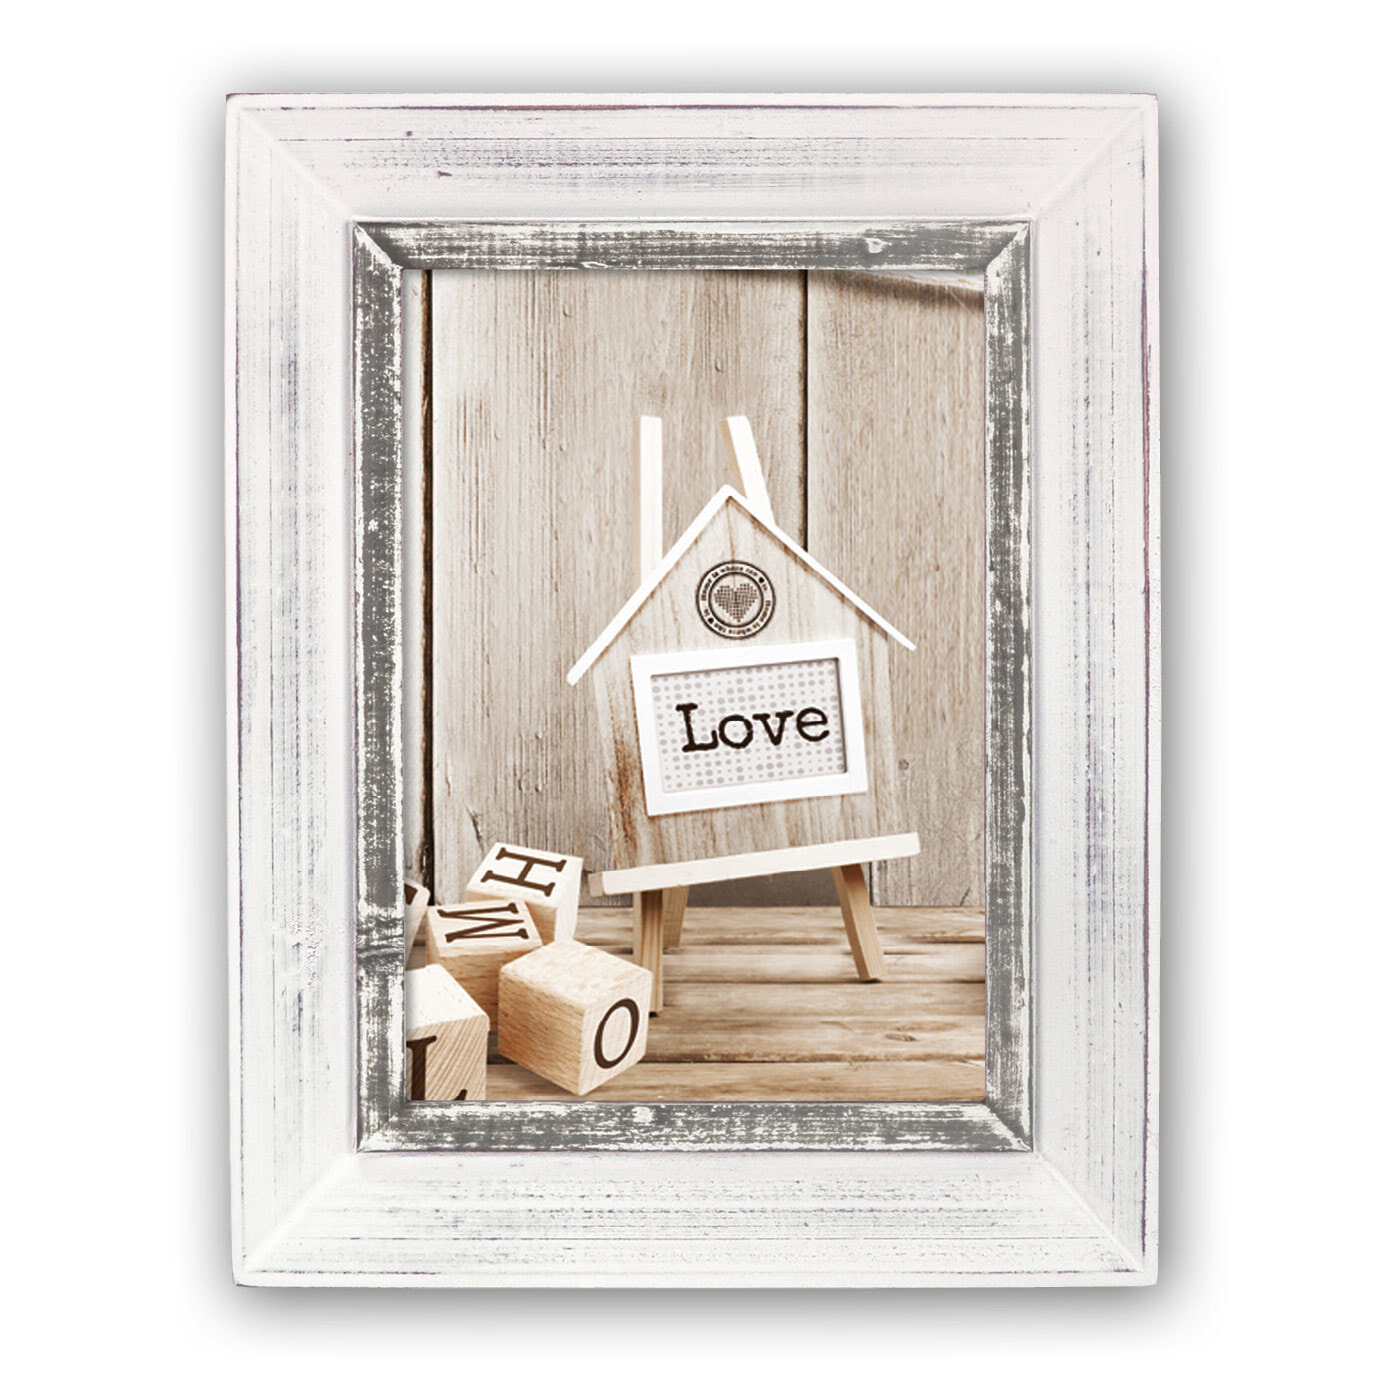 Zep ATHIS - MDF - Wood - Grey - White - Single picture frame - Table - Wall - 13 x 18 cm - Rectangular